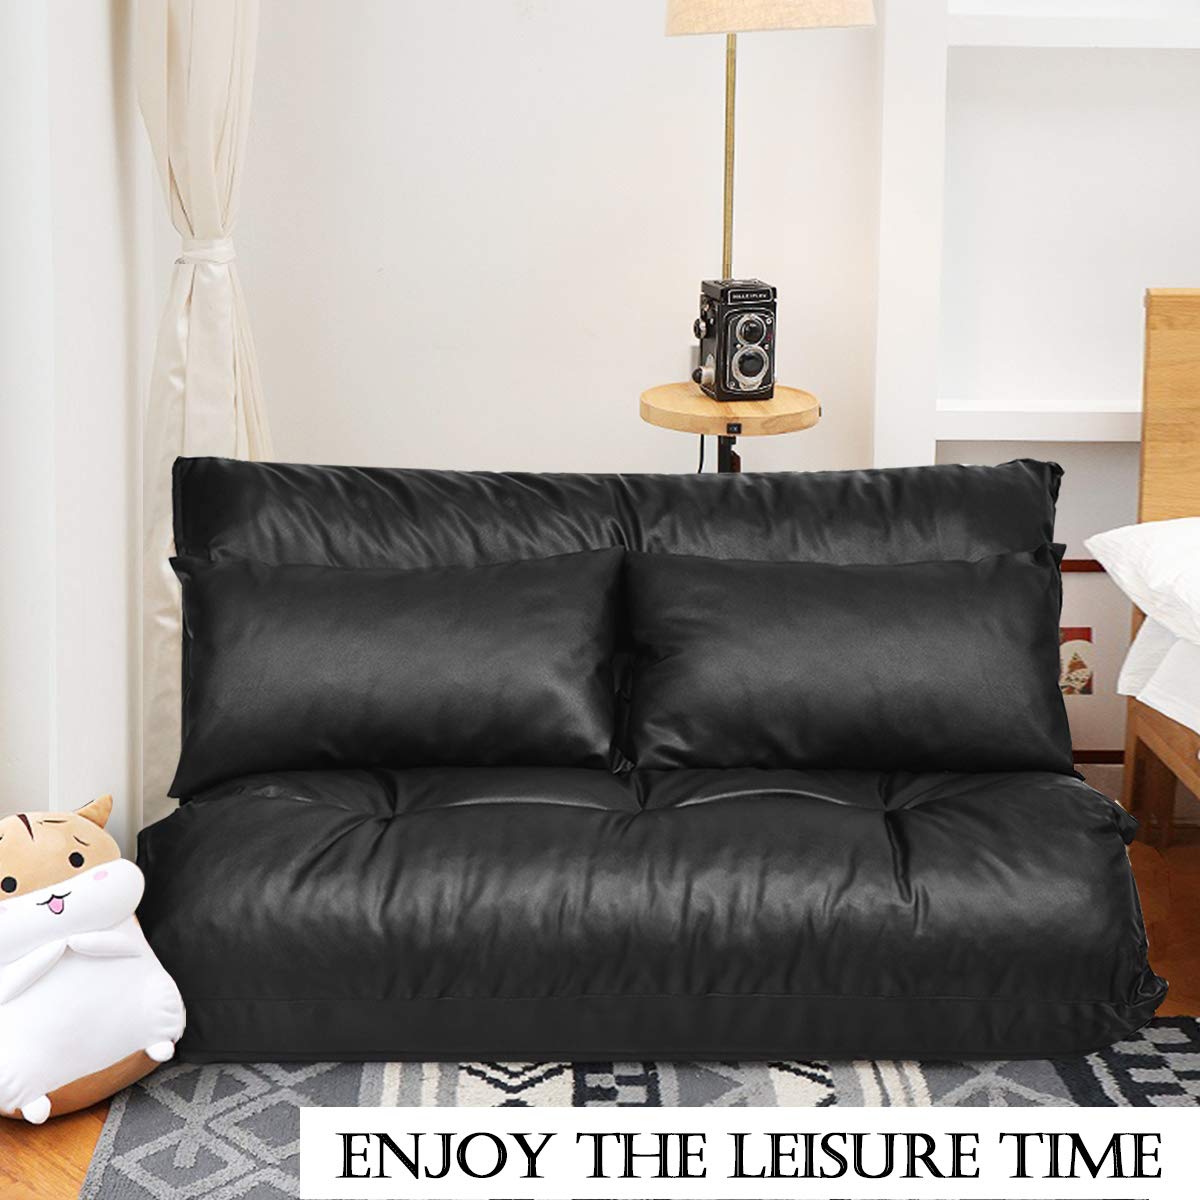 Giantex Floor Sofa PU Leather Leisure Bed Video Gaming Sofa with Two Pillows, Black